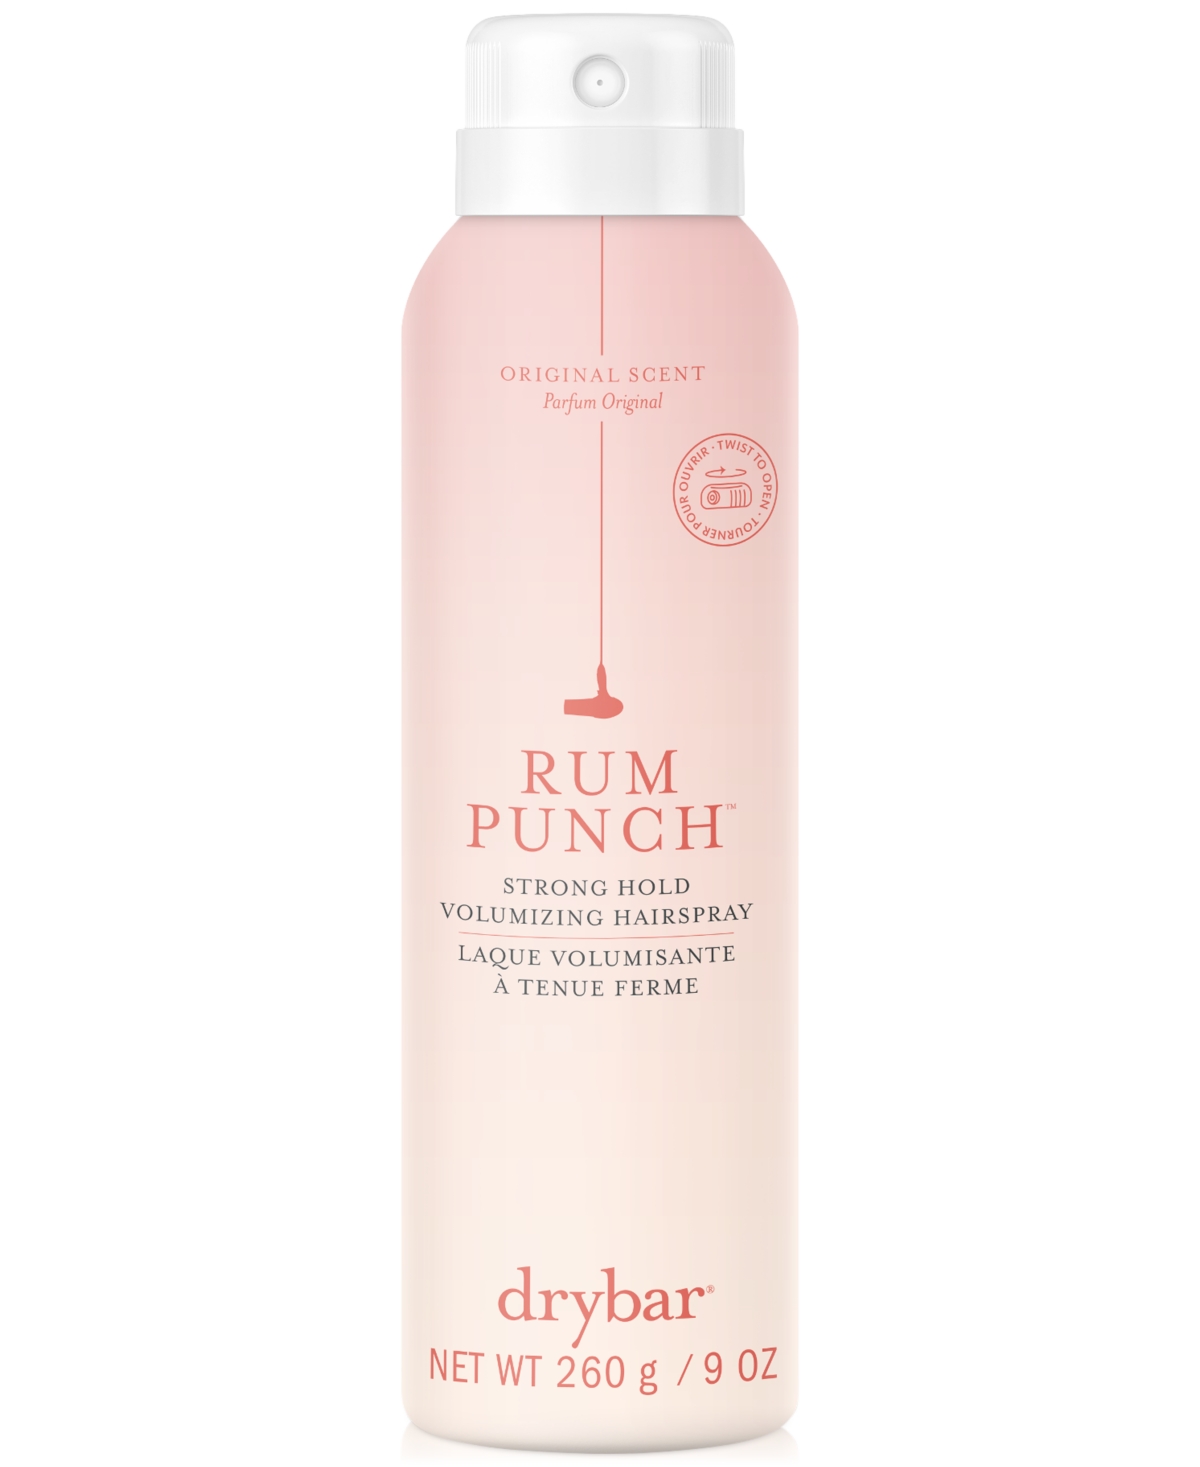 Drybar Rum Punch Strong Hold Volumizing Hairspray, 9 Oz. In No Color